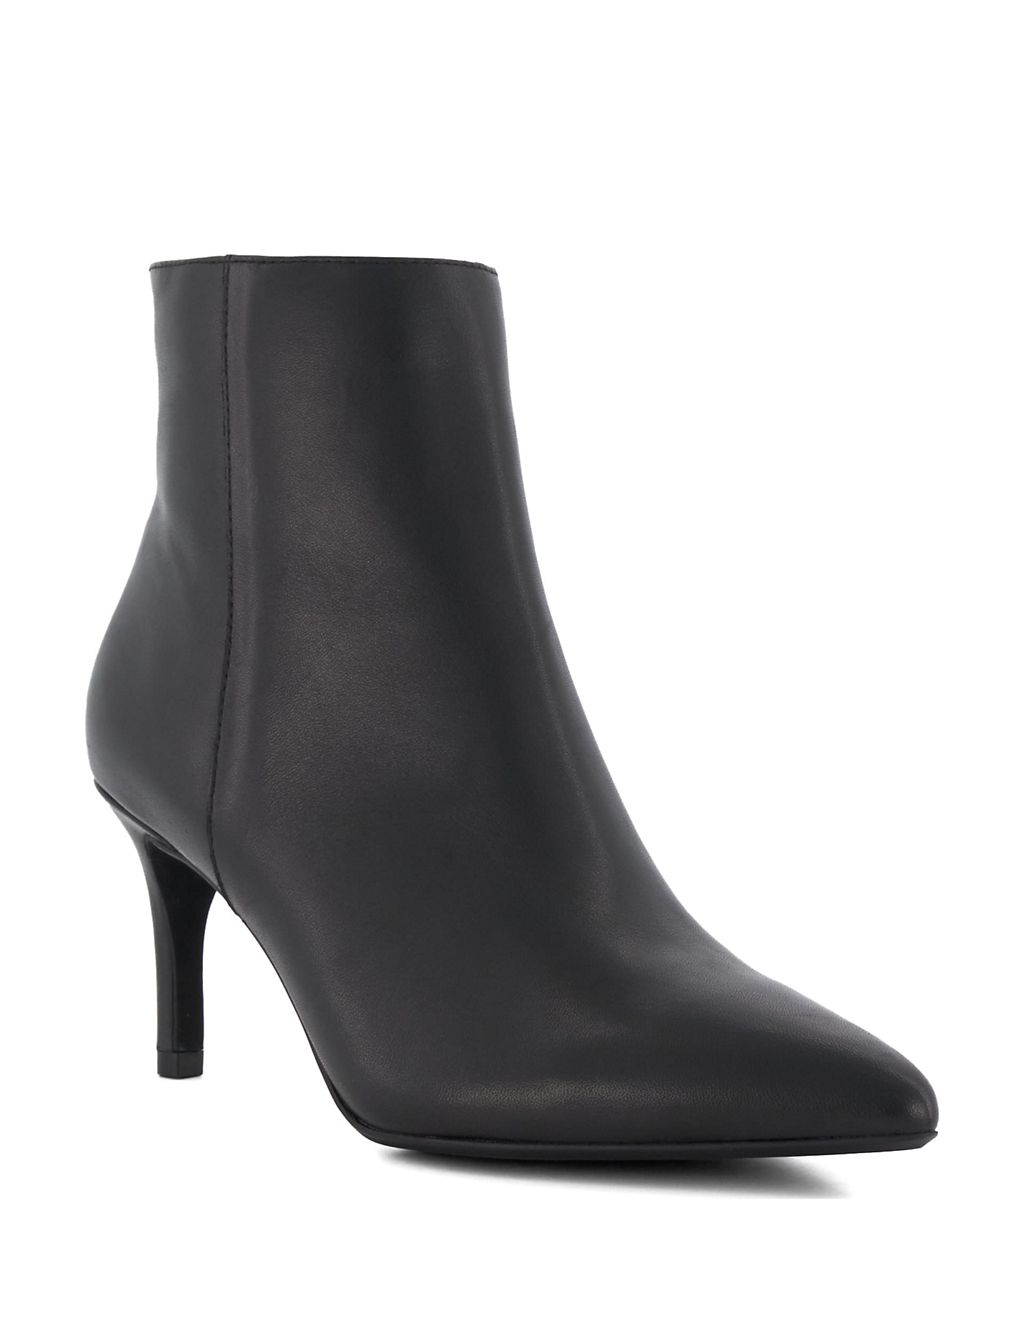 Leather Stiletto Heel Pointed Ankle Boots | Dune London | M&S